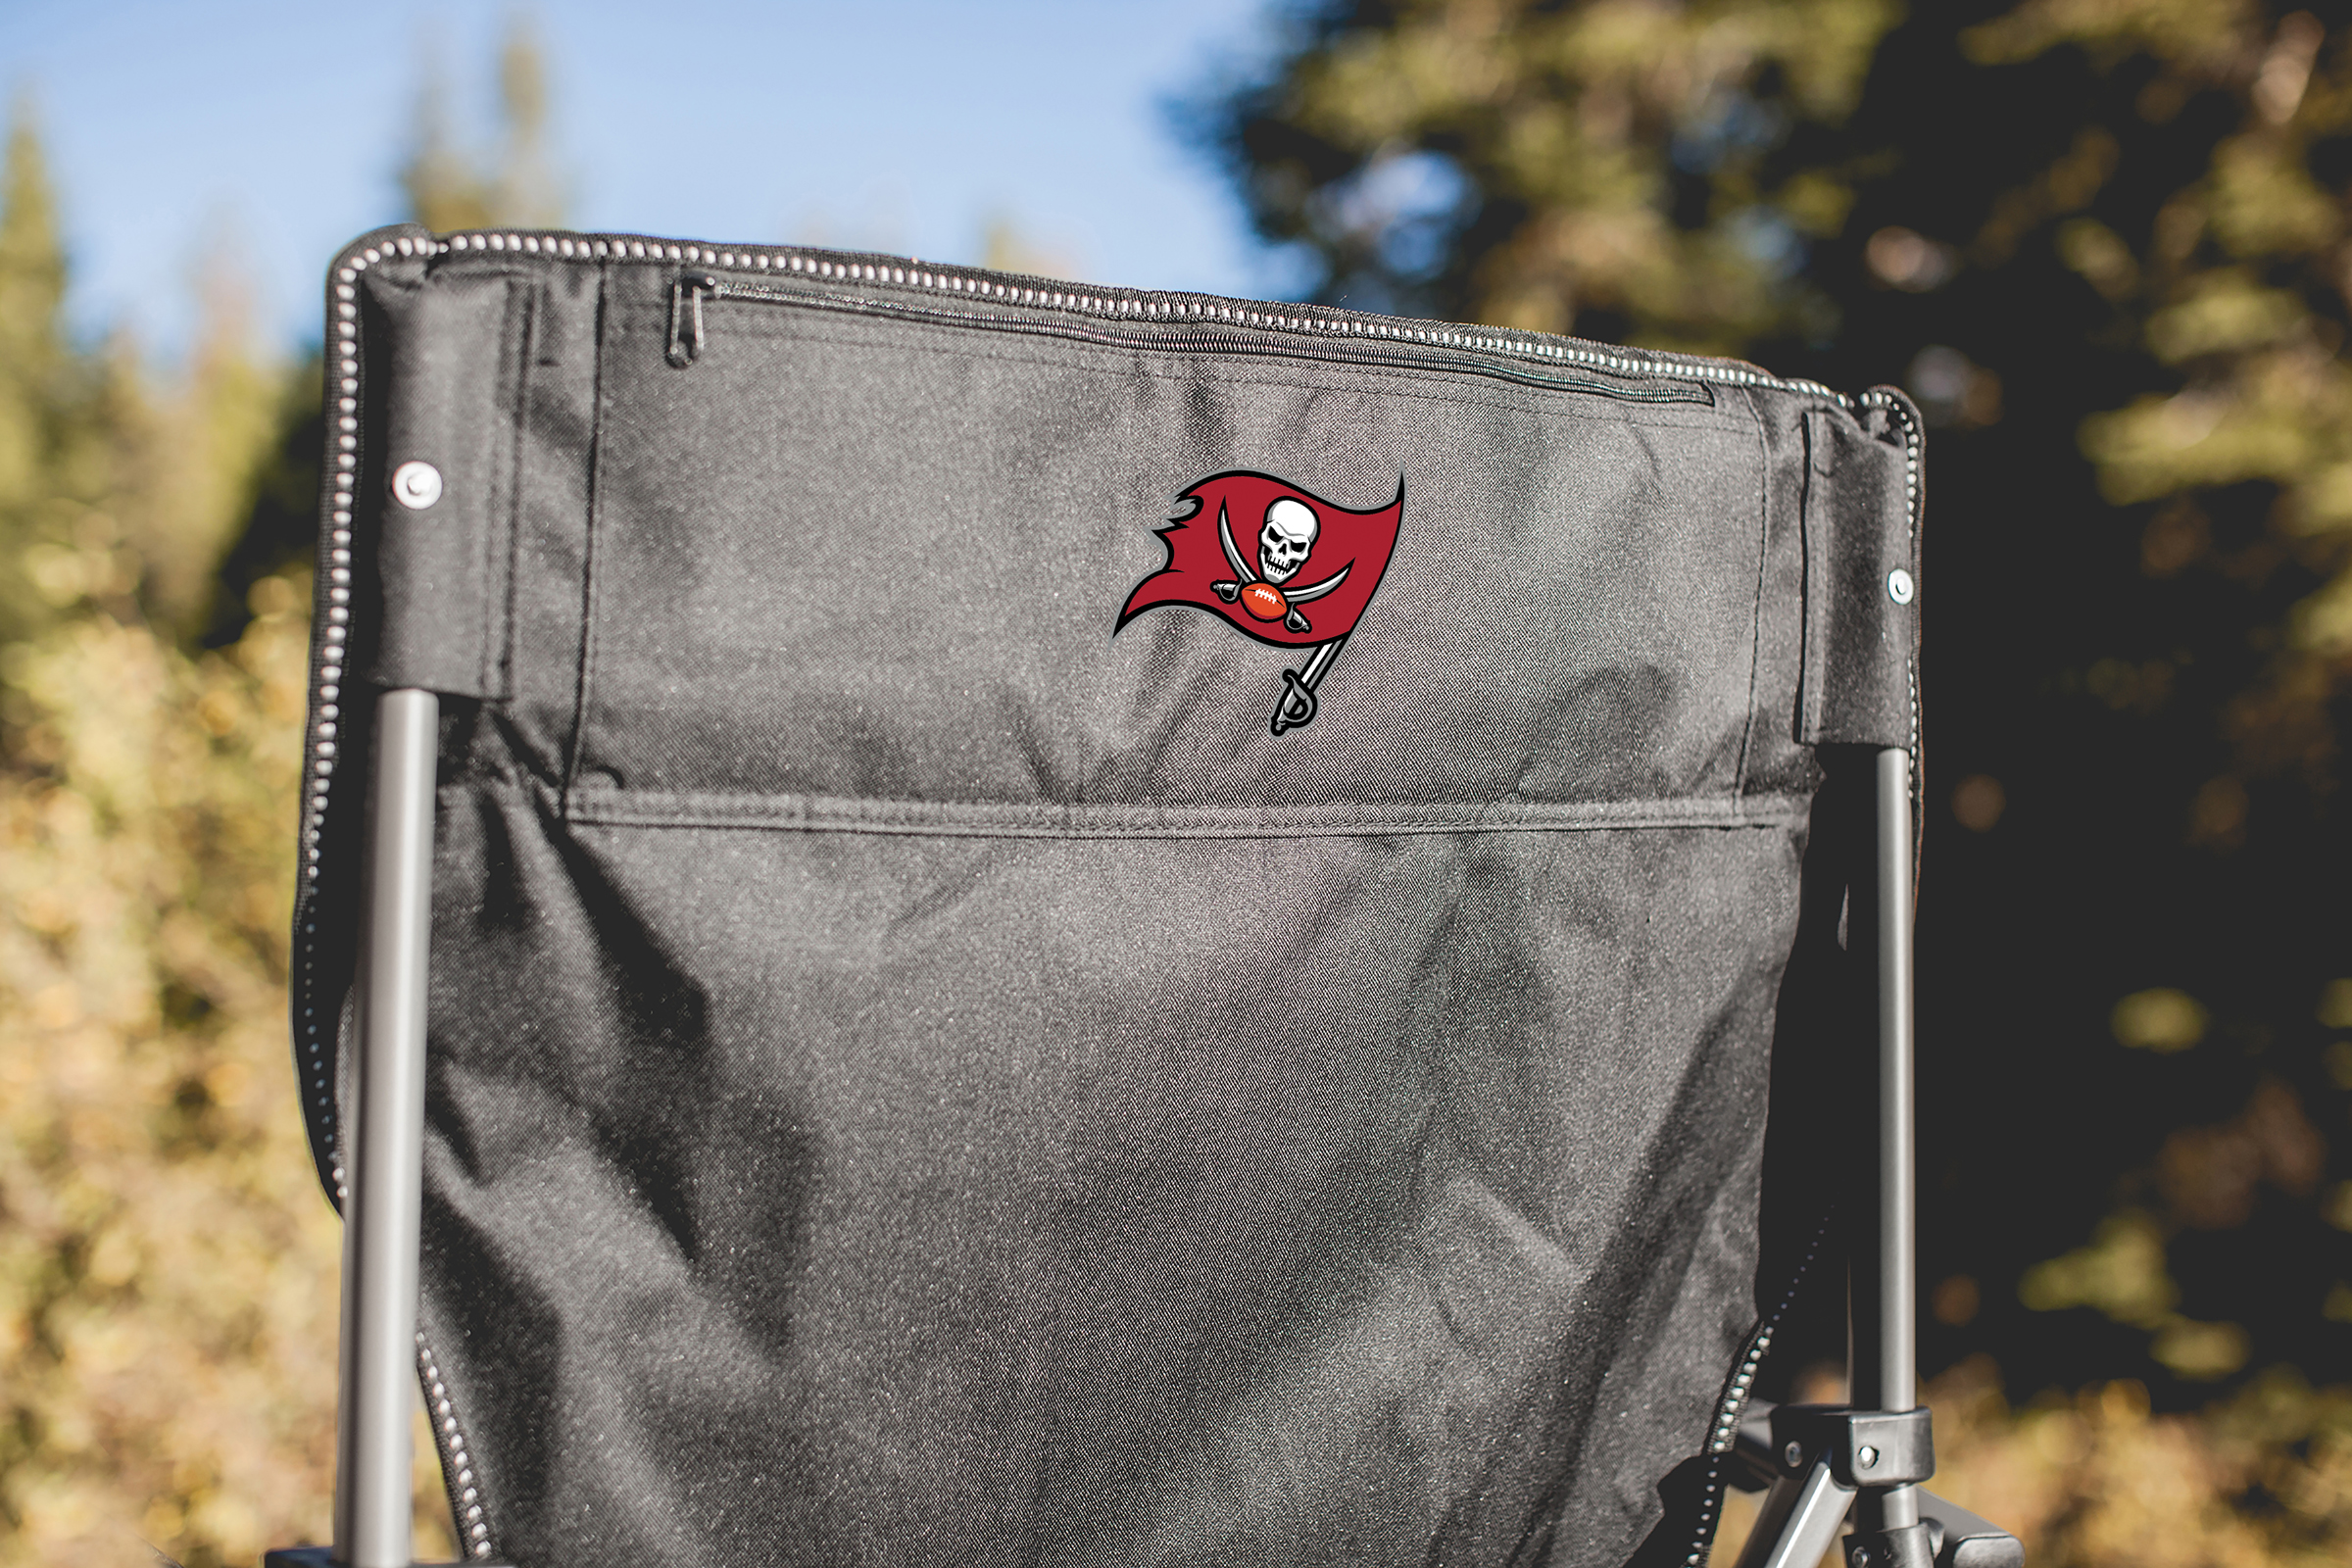 Tampa Bay Buccaneers - Outlander XL Camping Chair with Cooler